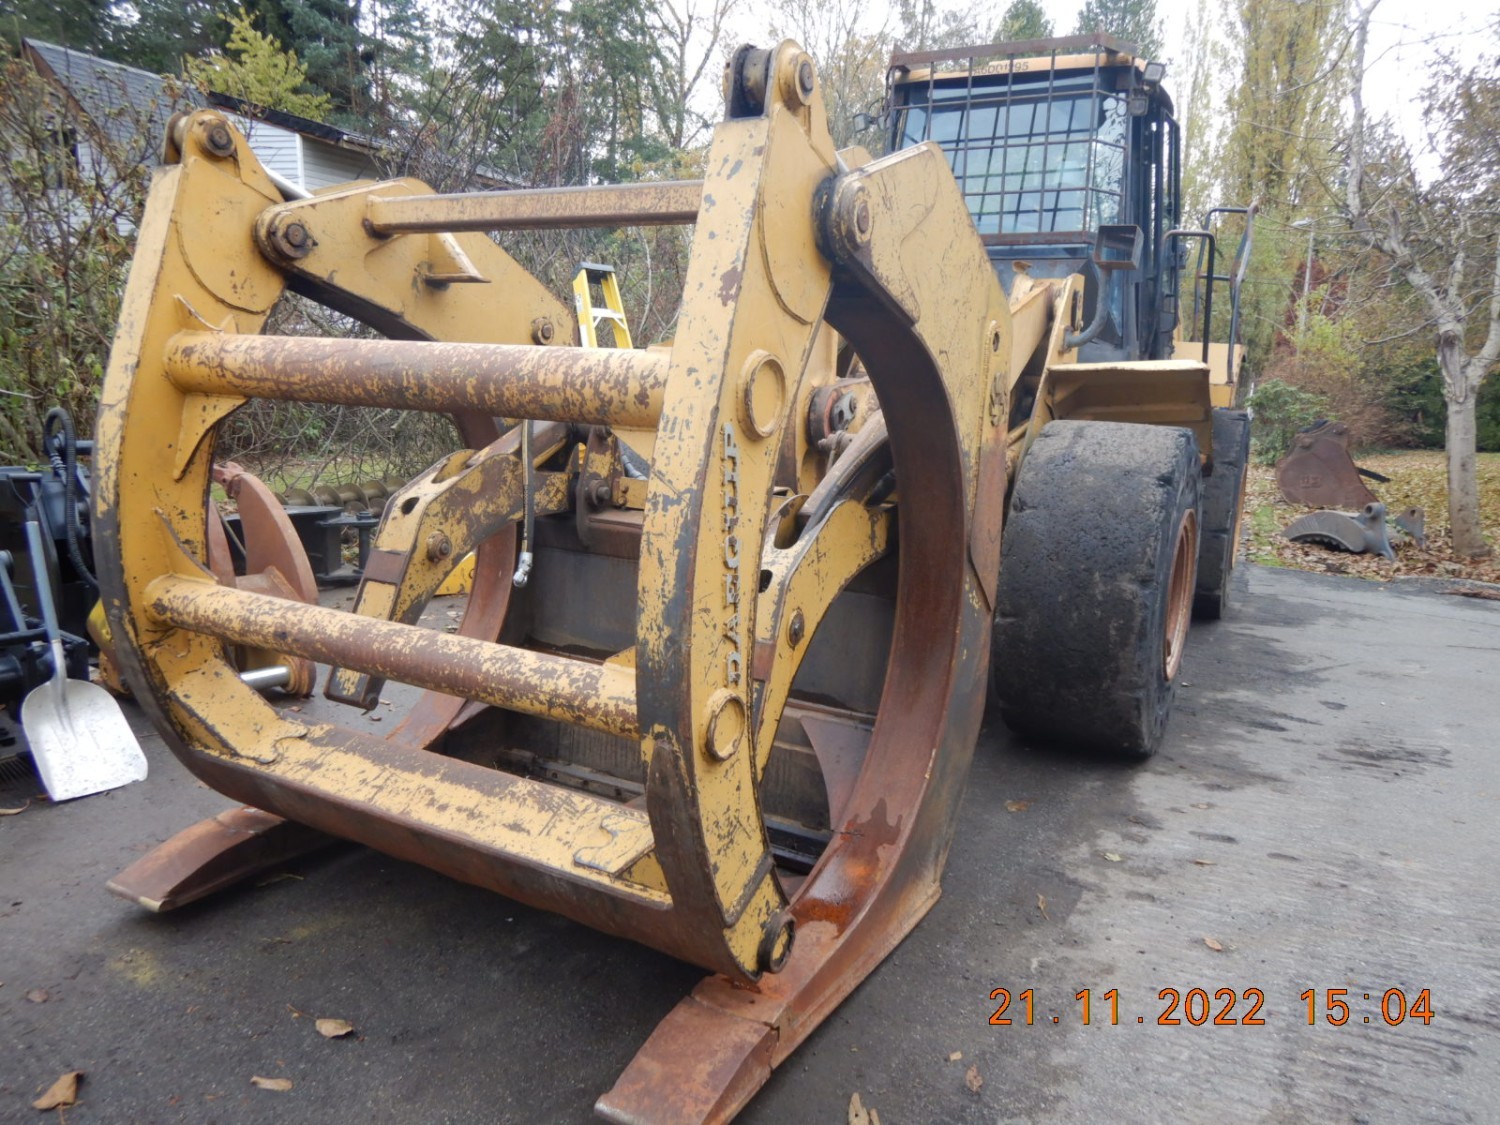 sold-2010-cat-966h-cw-custom-daequip-dual-log-or-pipe-grapple-with-internal-grapple-to-keep-pipe-logs-poles-secure-big-14